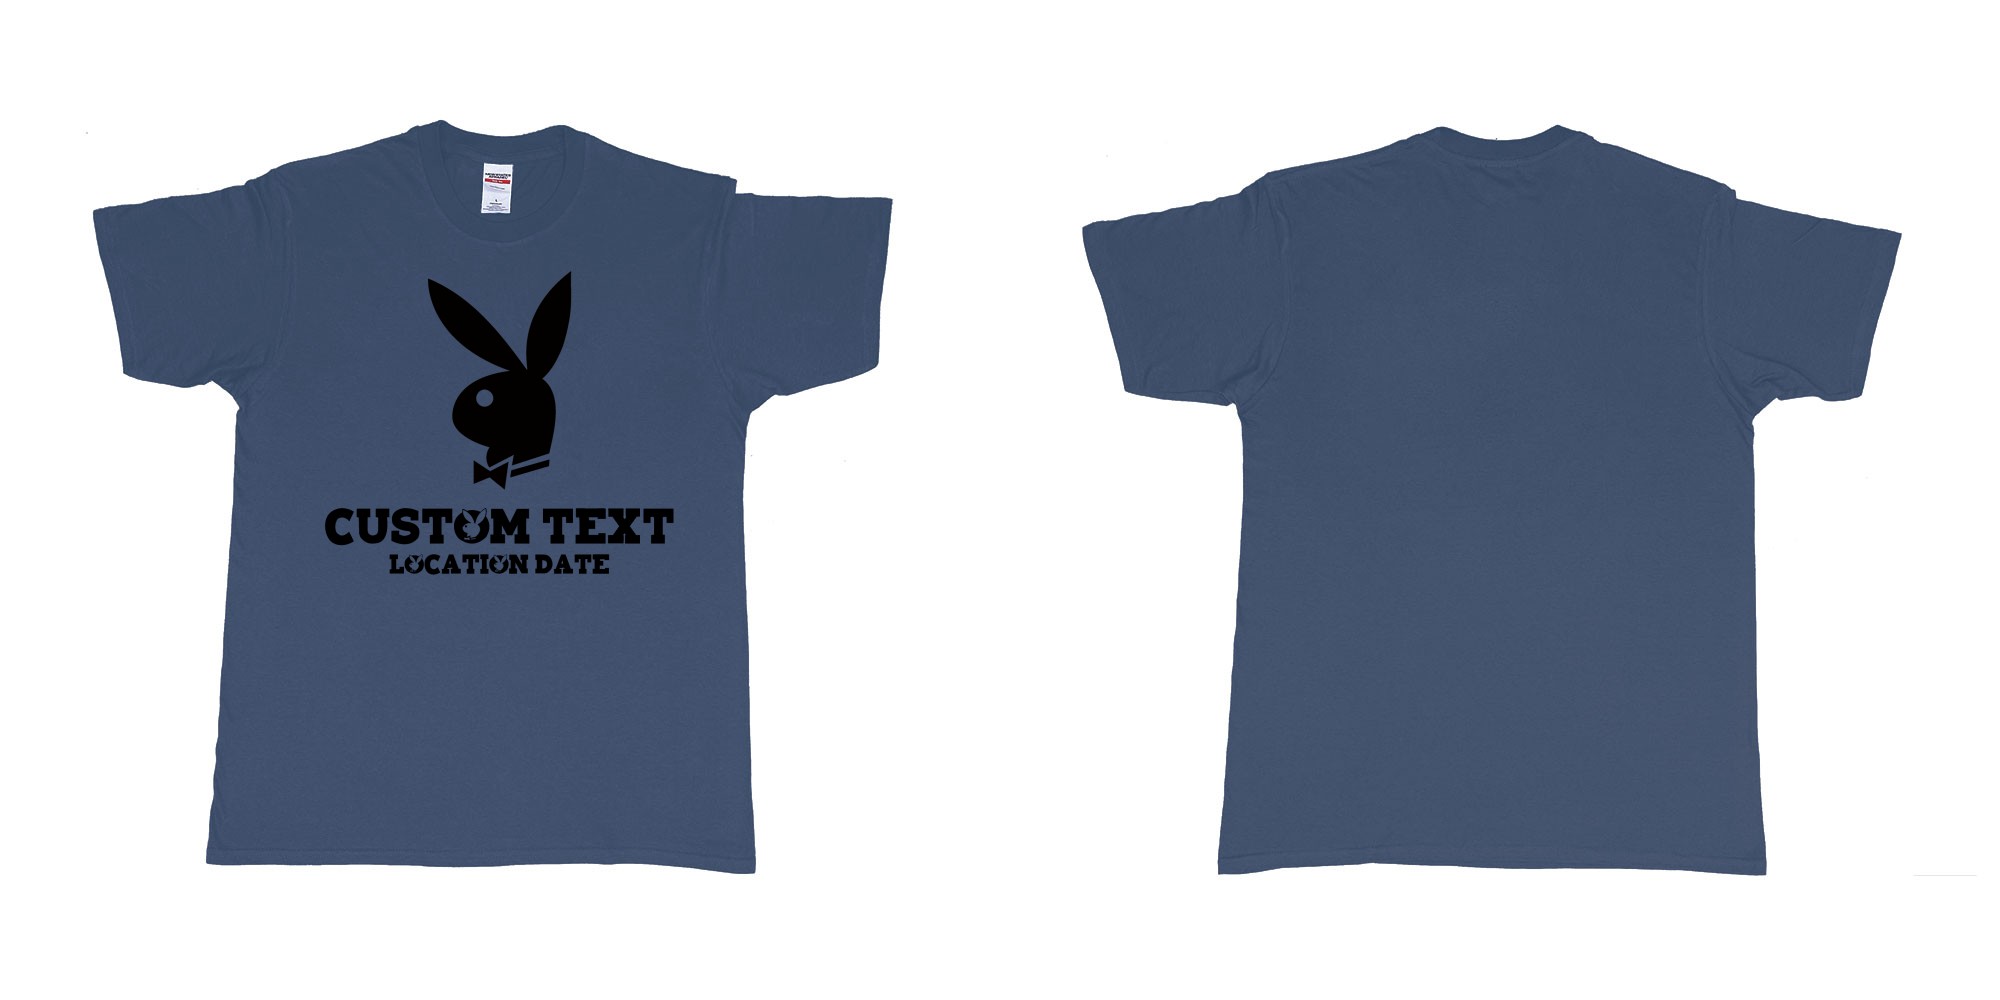 Custom tshirt design playboy playgirl custom text tshirt in fabric color navy choice your own text made in Bali by The Pirate Way